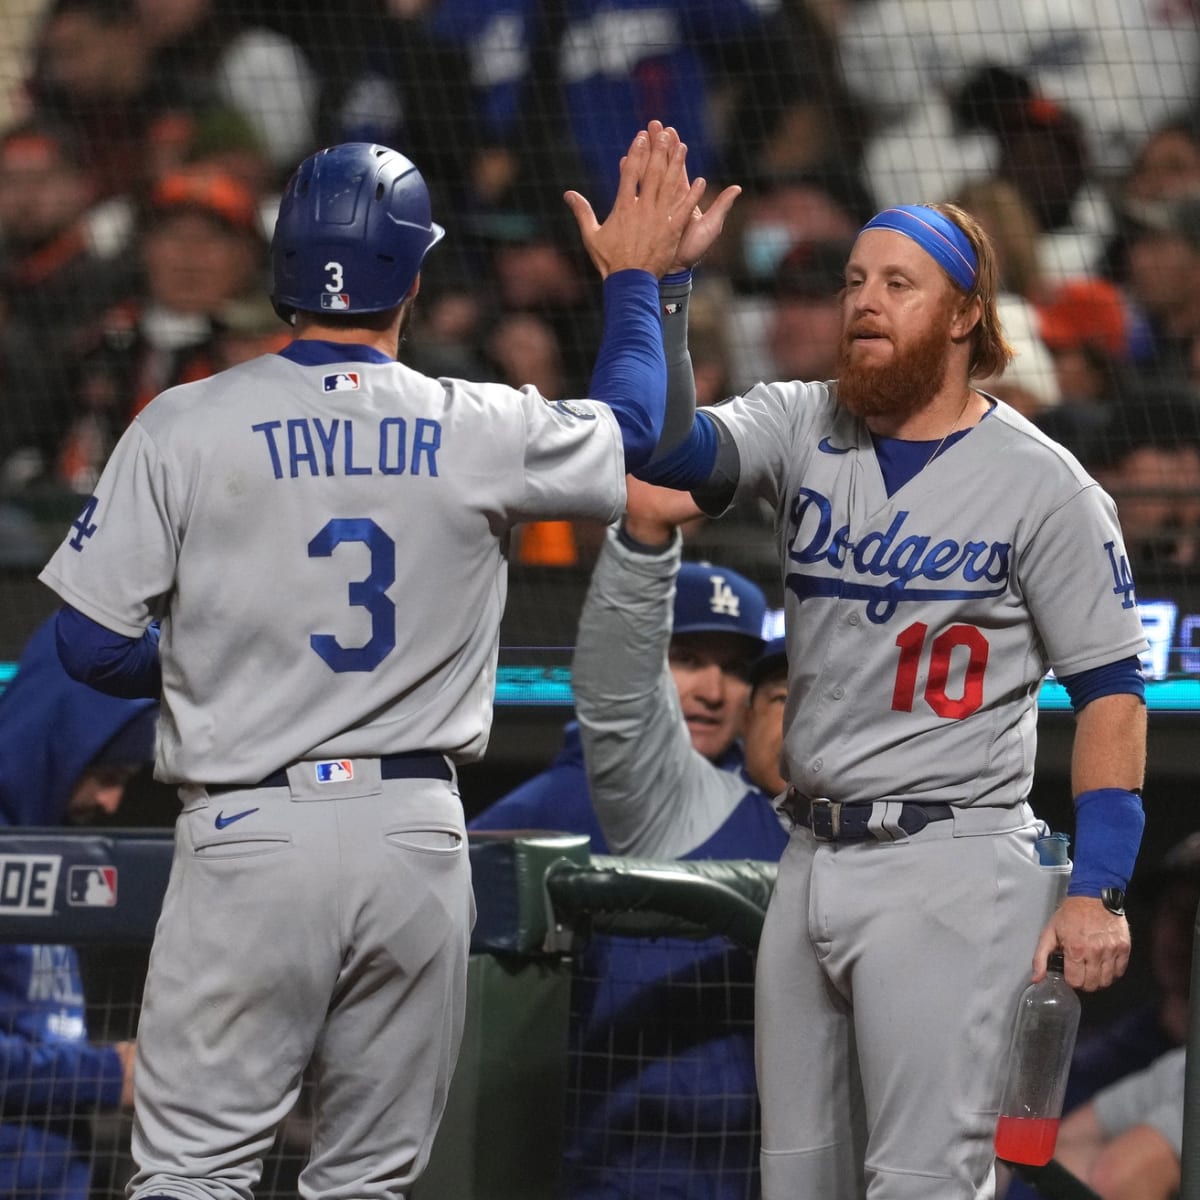 Justin Turner's unexpected departure from the Dodgers has been the